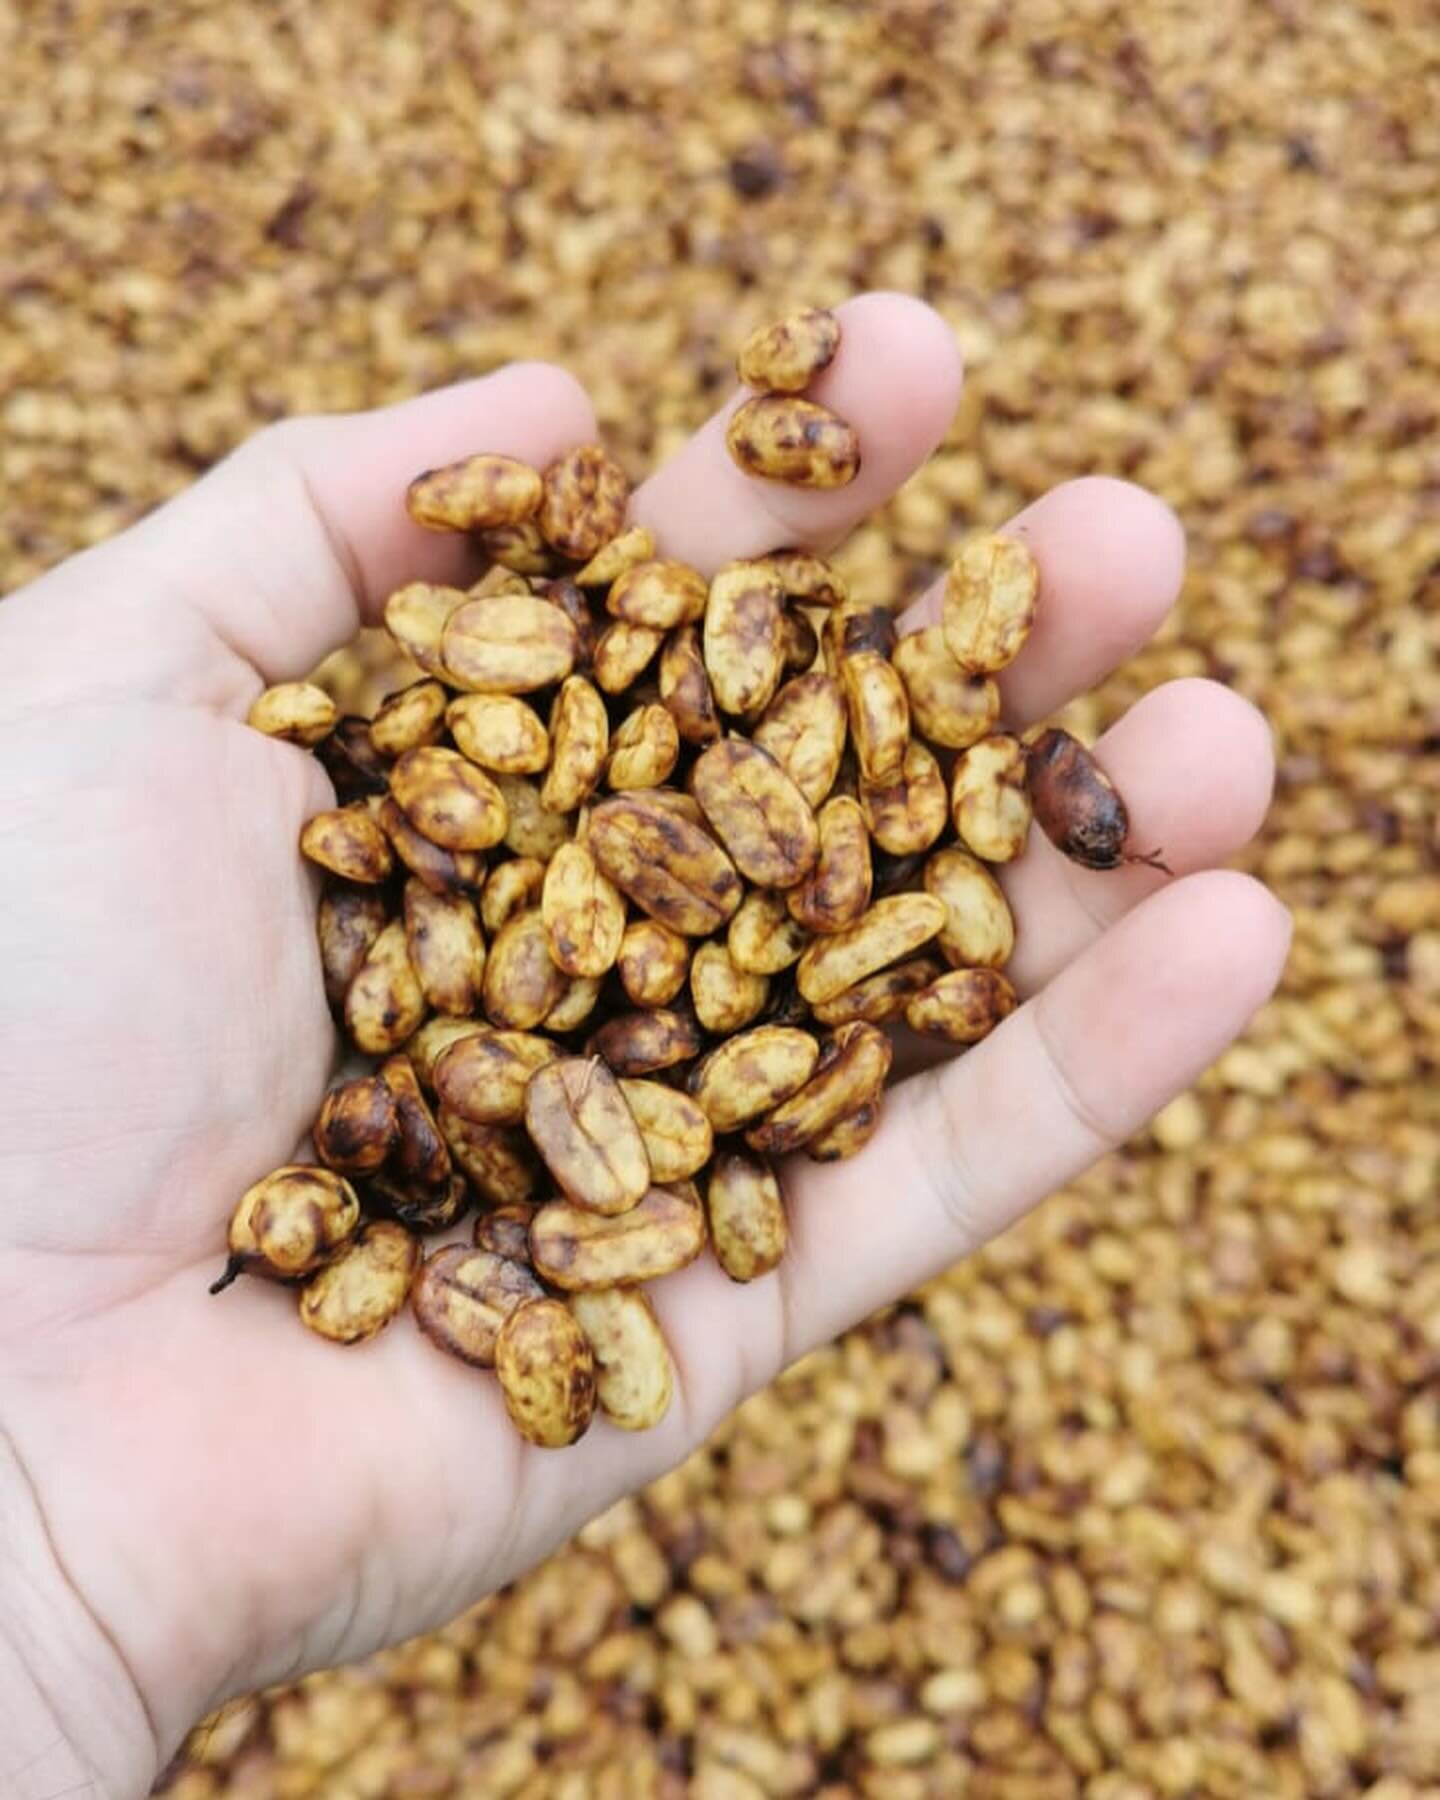 It&rsquo;s harvest season in Panam&aacute;, and everything is looking fantastic! One of our producer partners recently shared some farm photos. In these images, you&rsquo;ll see the natural process of extracting coffee beans from the fruit. This proc